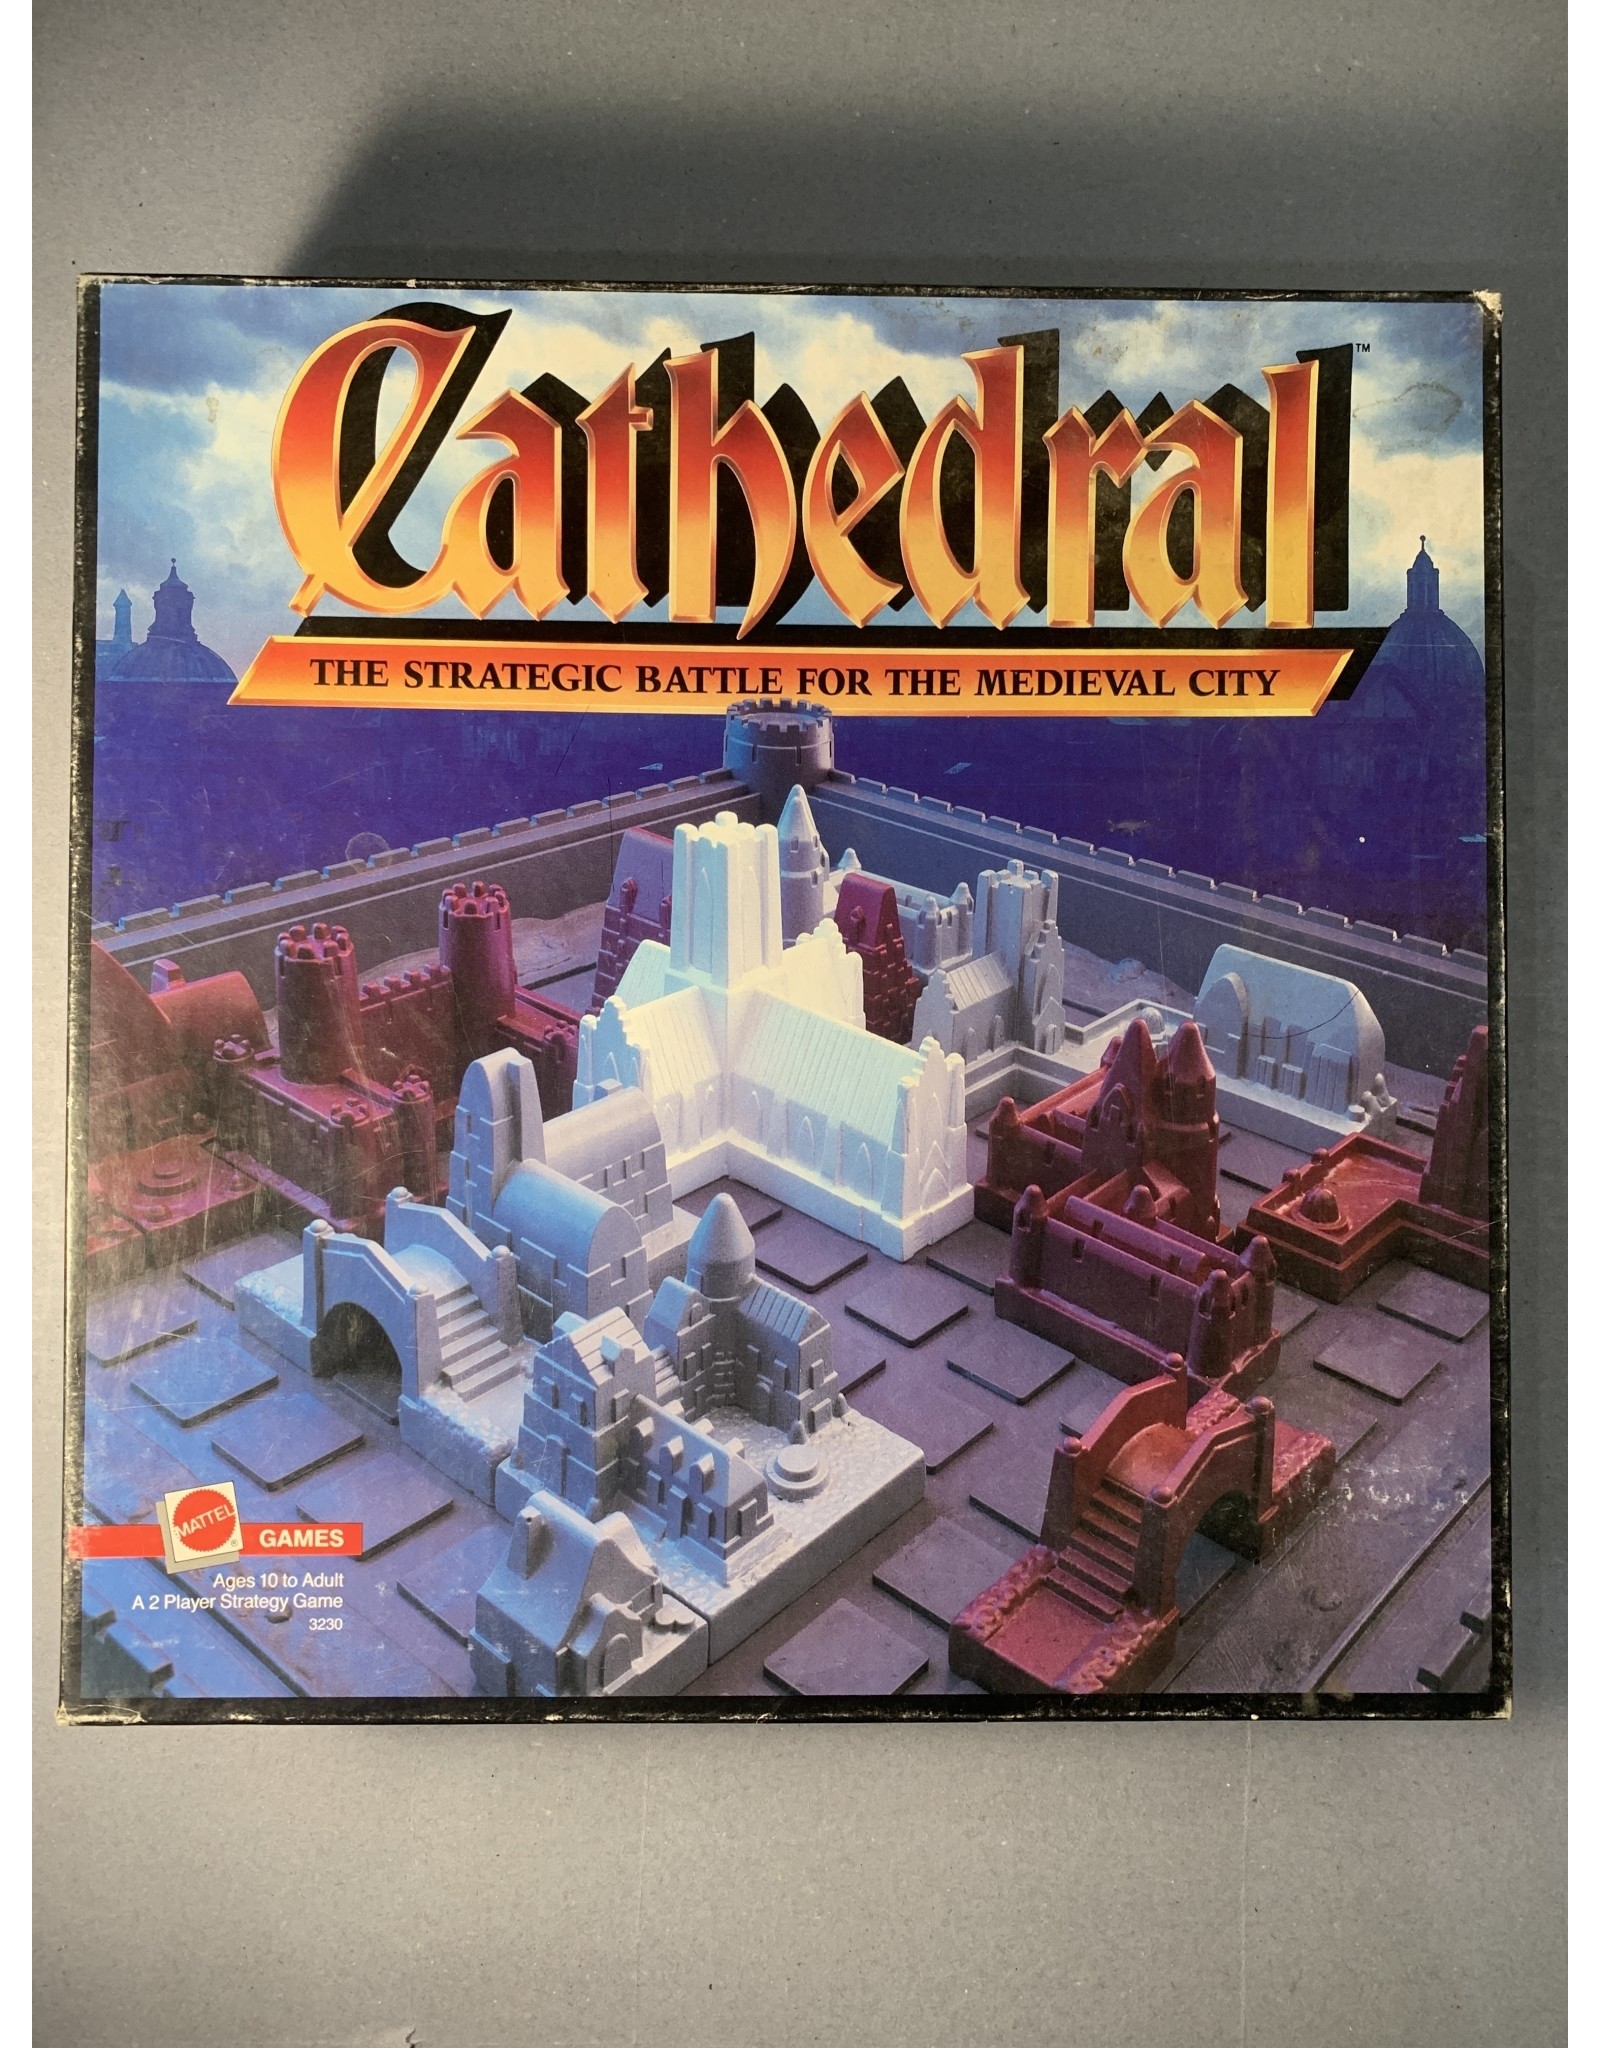 Mattel Cathedral (1986)